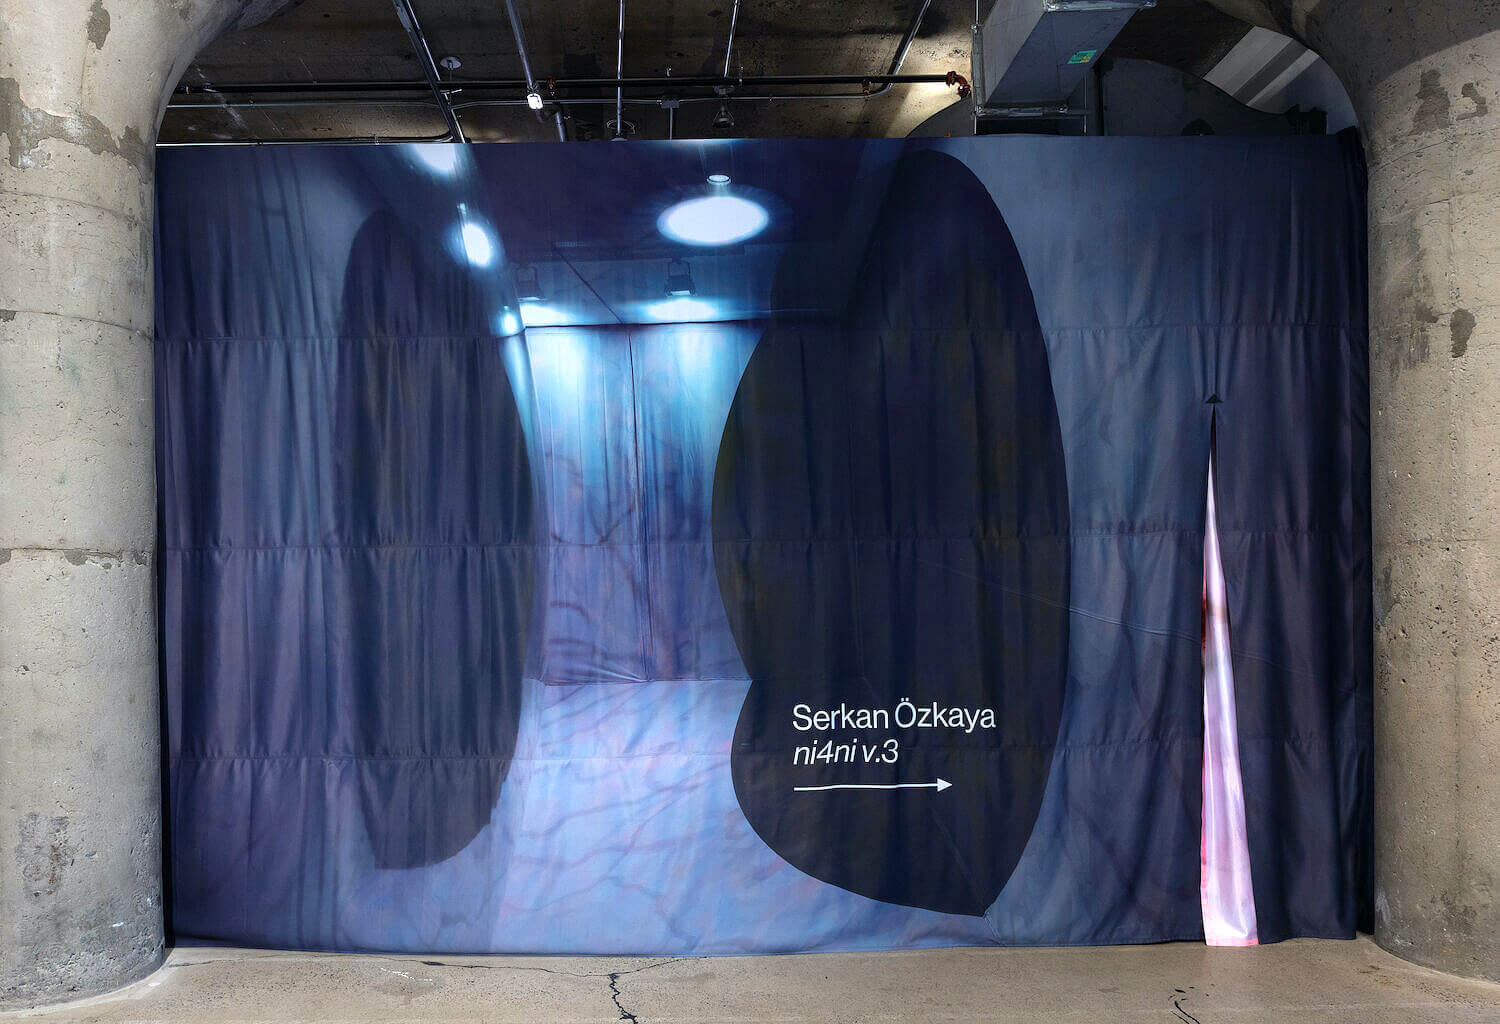 A heavy curtain hangs between two large cylindrical cement pillars. On the curtain is printed an image of the artwork inside with the artist's name and the title of the artwork. A slit in the fabric is open on the right side